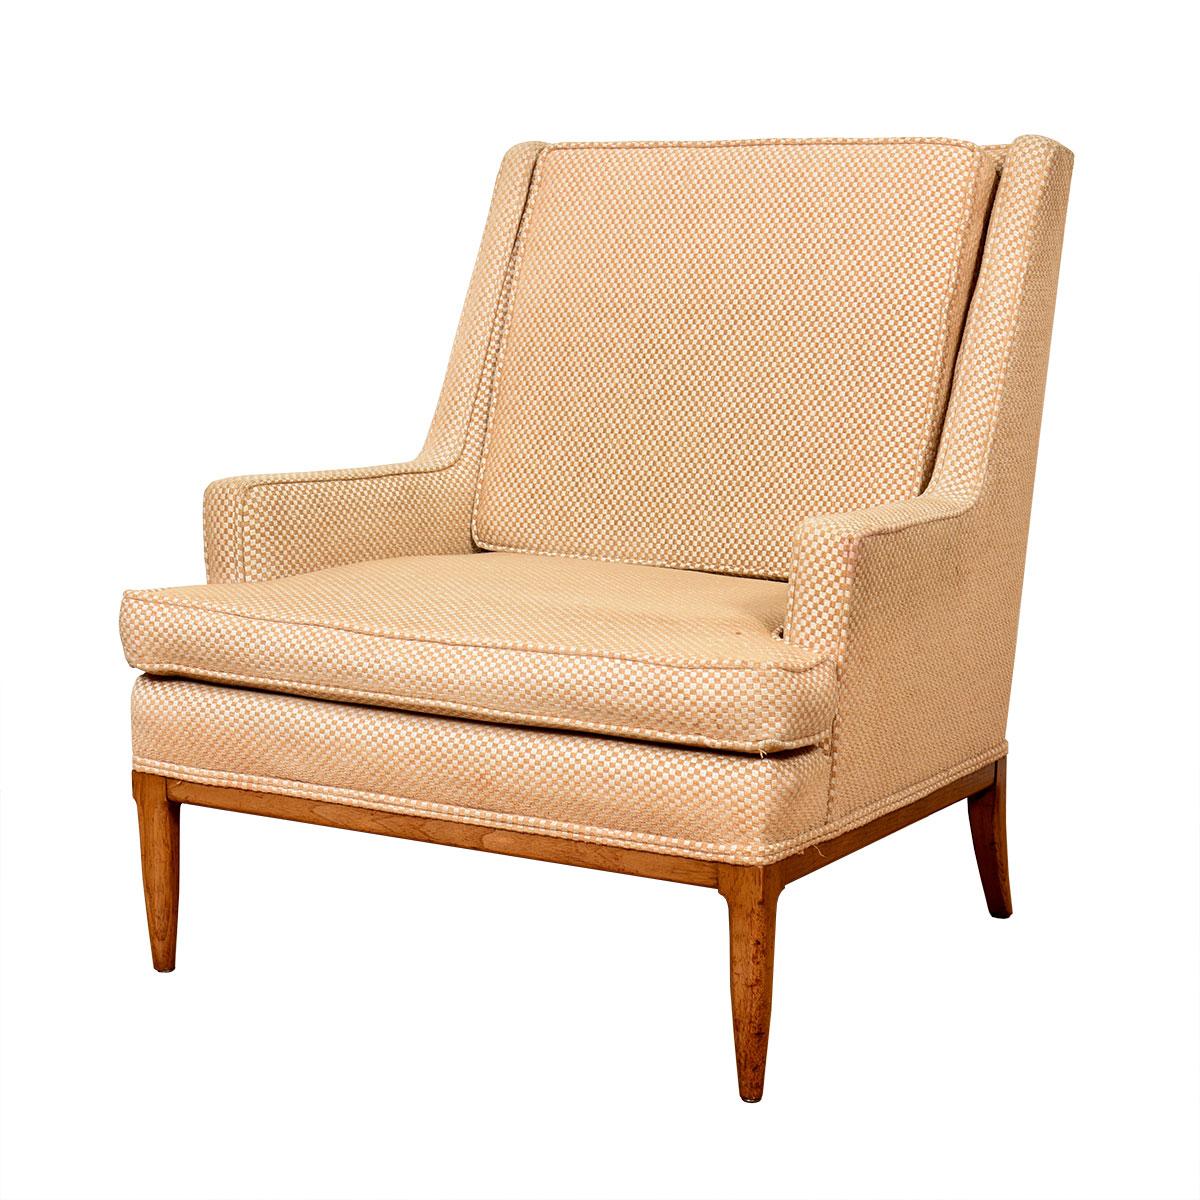 Paul McCobb Style midcentury Upholstered Club Chair

Additional information:
Material: Upholstery
Featured @ DC:
Sleek transitional club chair with midcentury flair and Paul McCobb Style.
Fully upholstered chair with removable